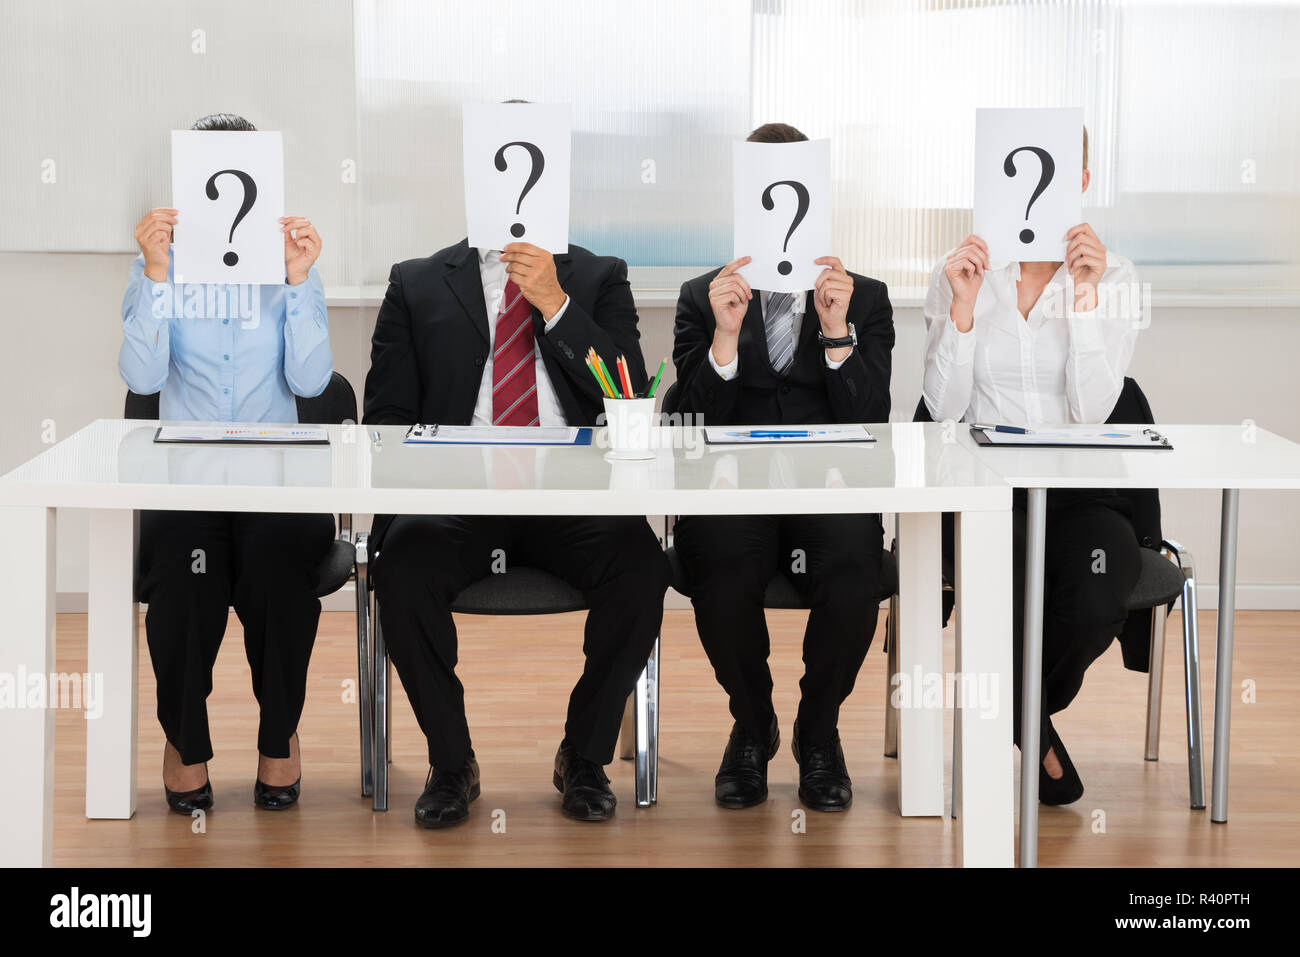 Businesspeople Hiding Face With Question Mark Sign Stock Photo